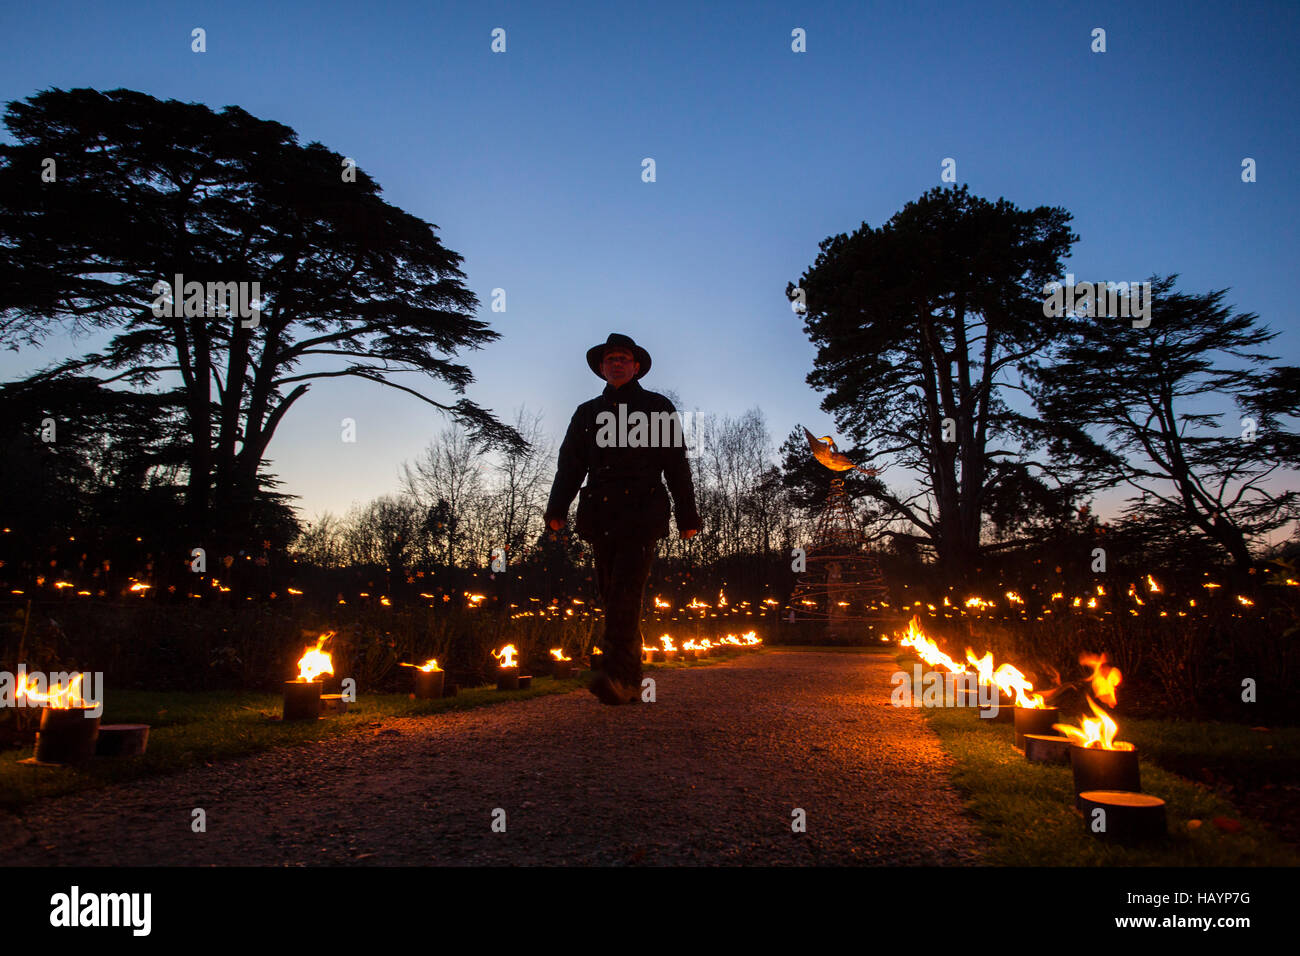 A male in silhouette agaisnt the darkeneing sky walks through the fire paths of the rose garden at Blenheim palace as the agrdens are lit up with festive lights for christmas. Stock Photo